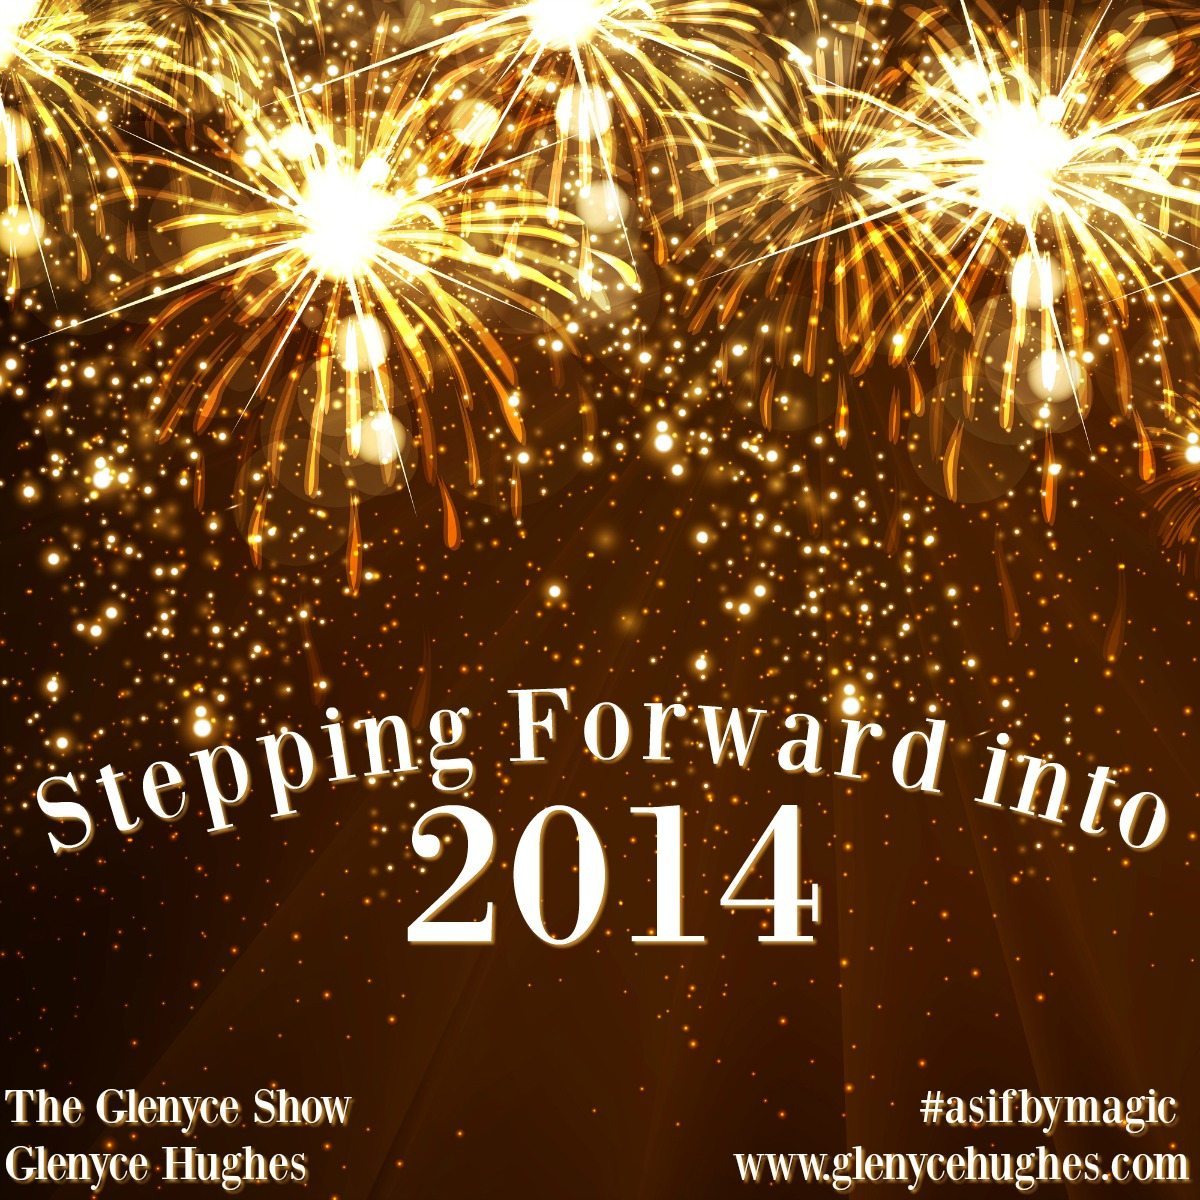 Stepping Forward into 2014